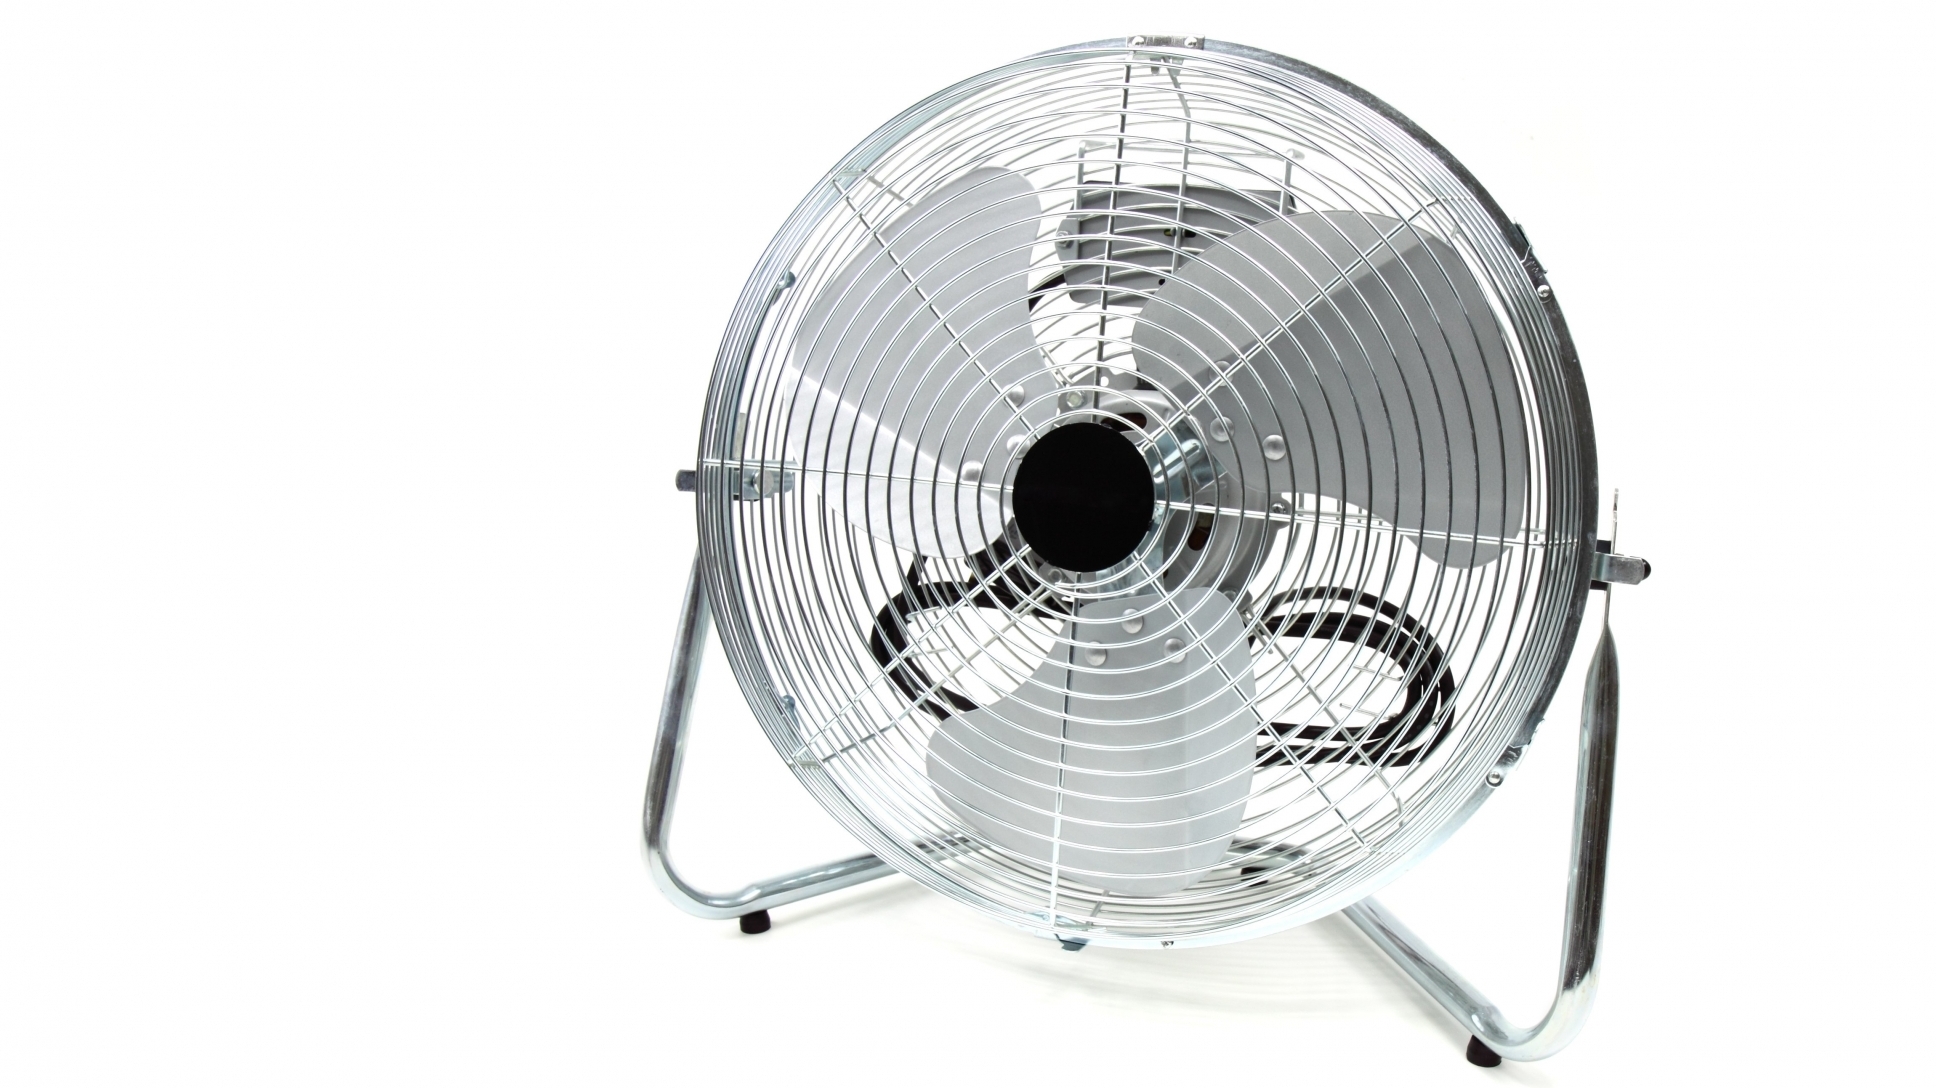 Use electric fans if the temperature is below 35°C